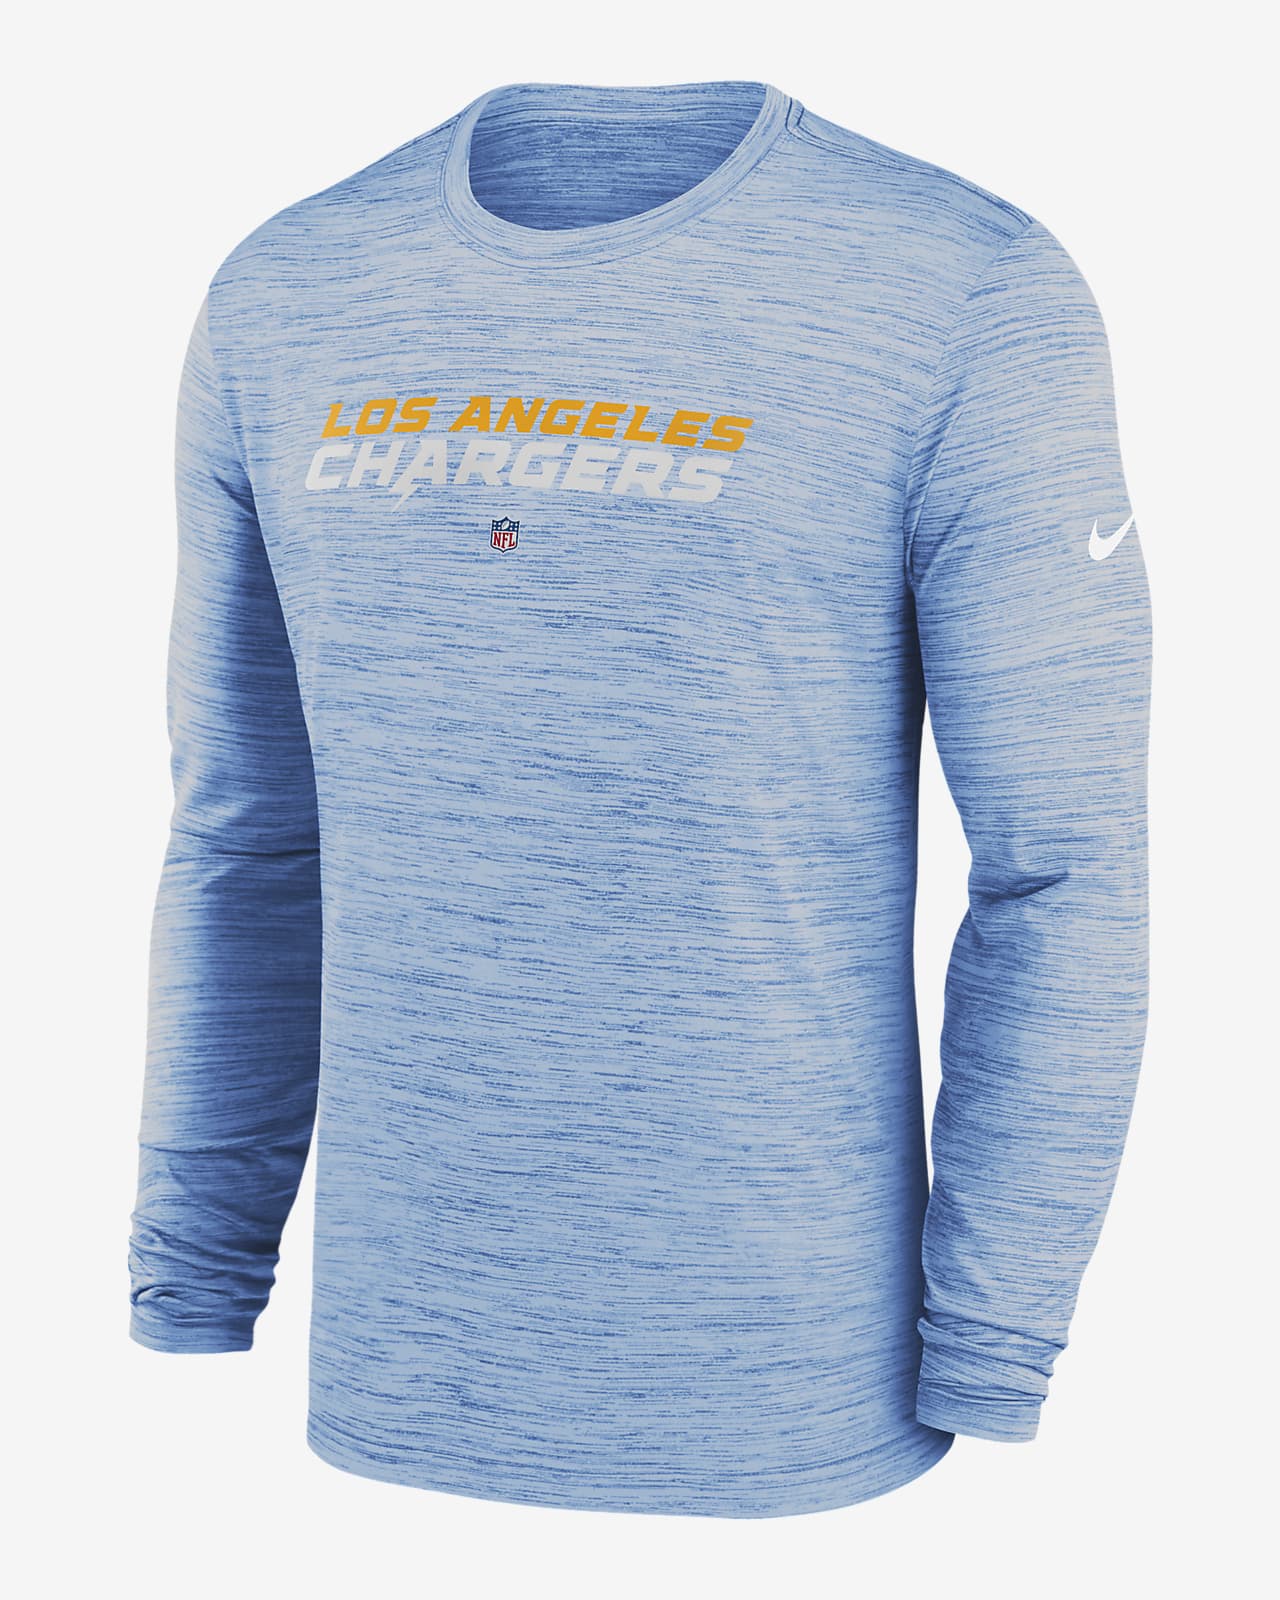 Nike Dri-FIT Sideline Velocity (NFL Los Angeles Chargers) Men's Long-Sleeve T-Shirt